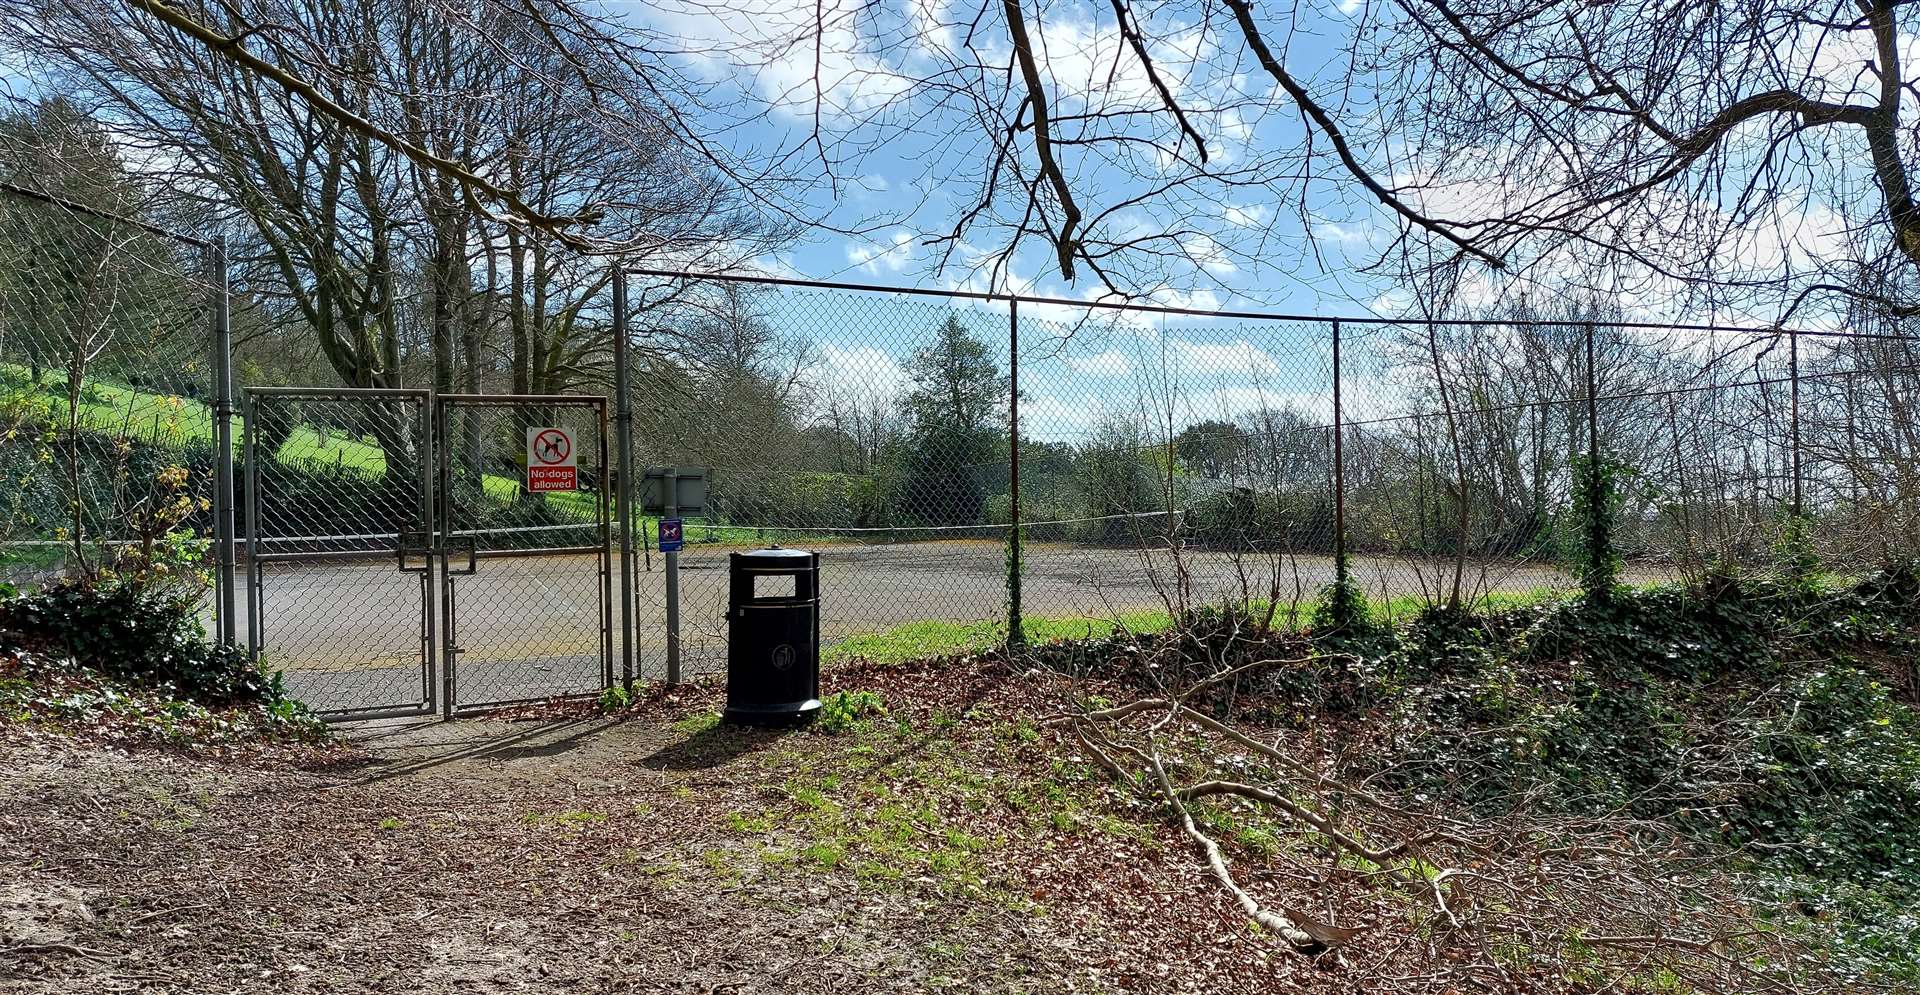 The courts are the only public tennis courts in the district